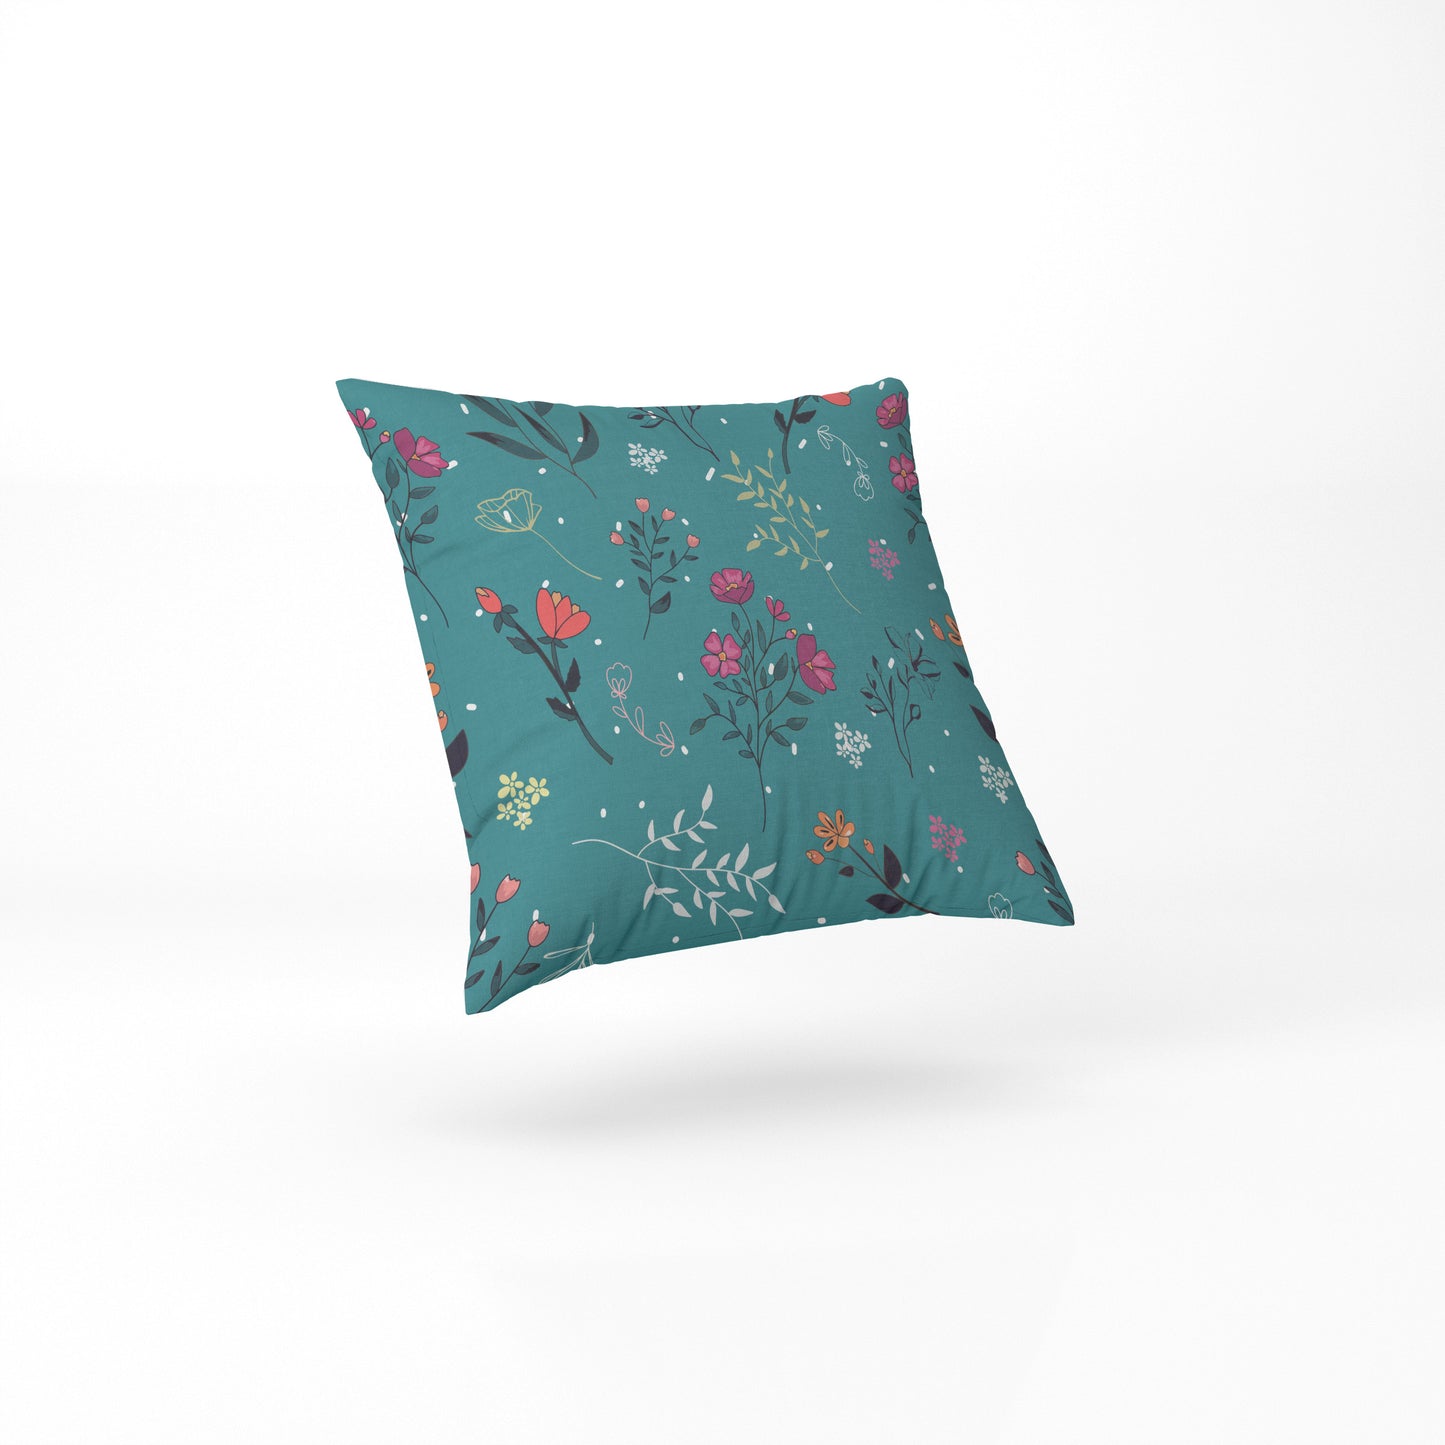 custom Teal Floral Pillow full sublimation printed in pastel colour